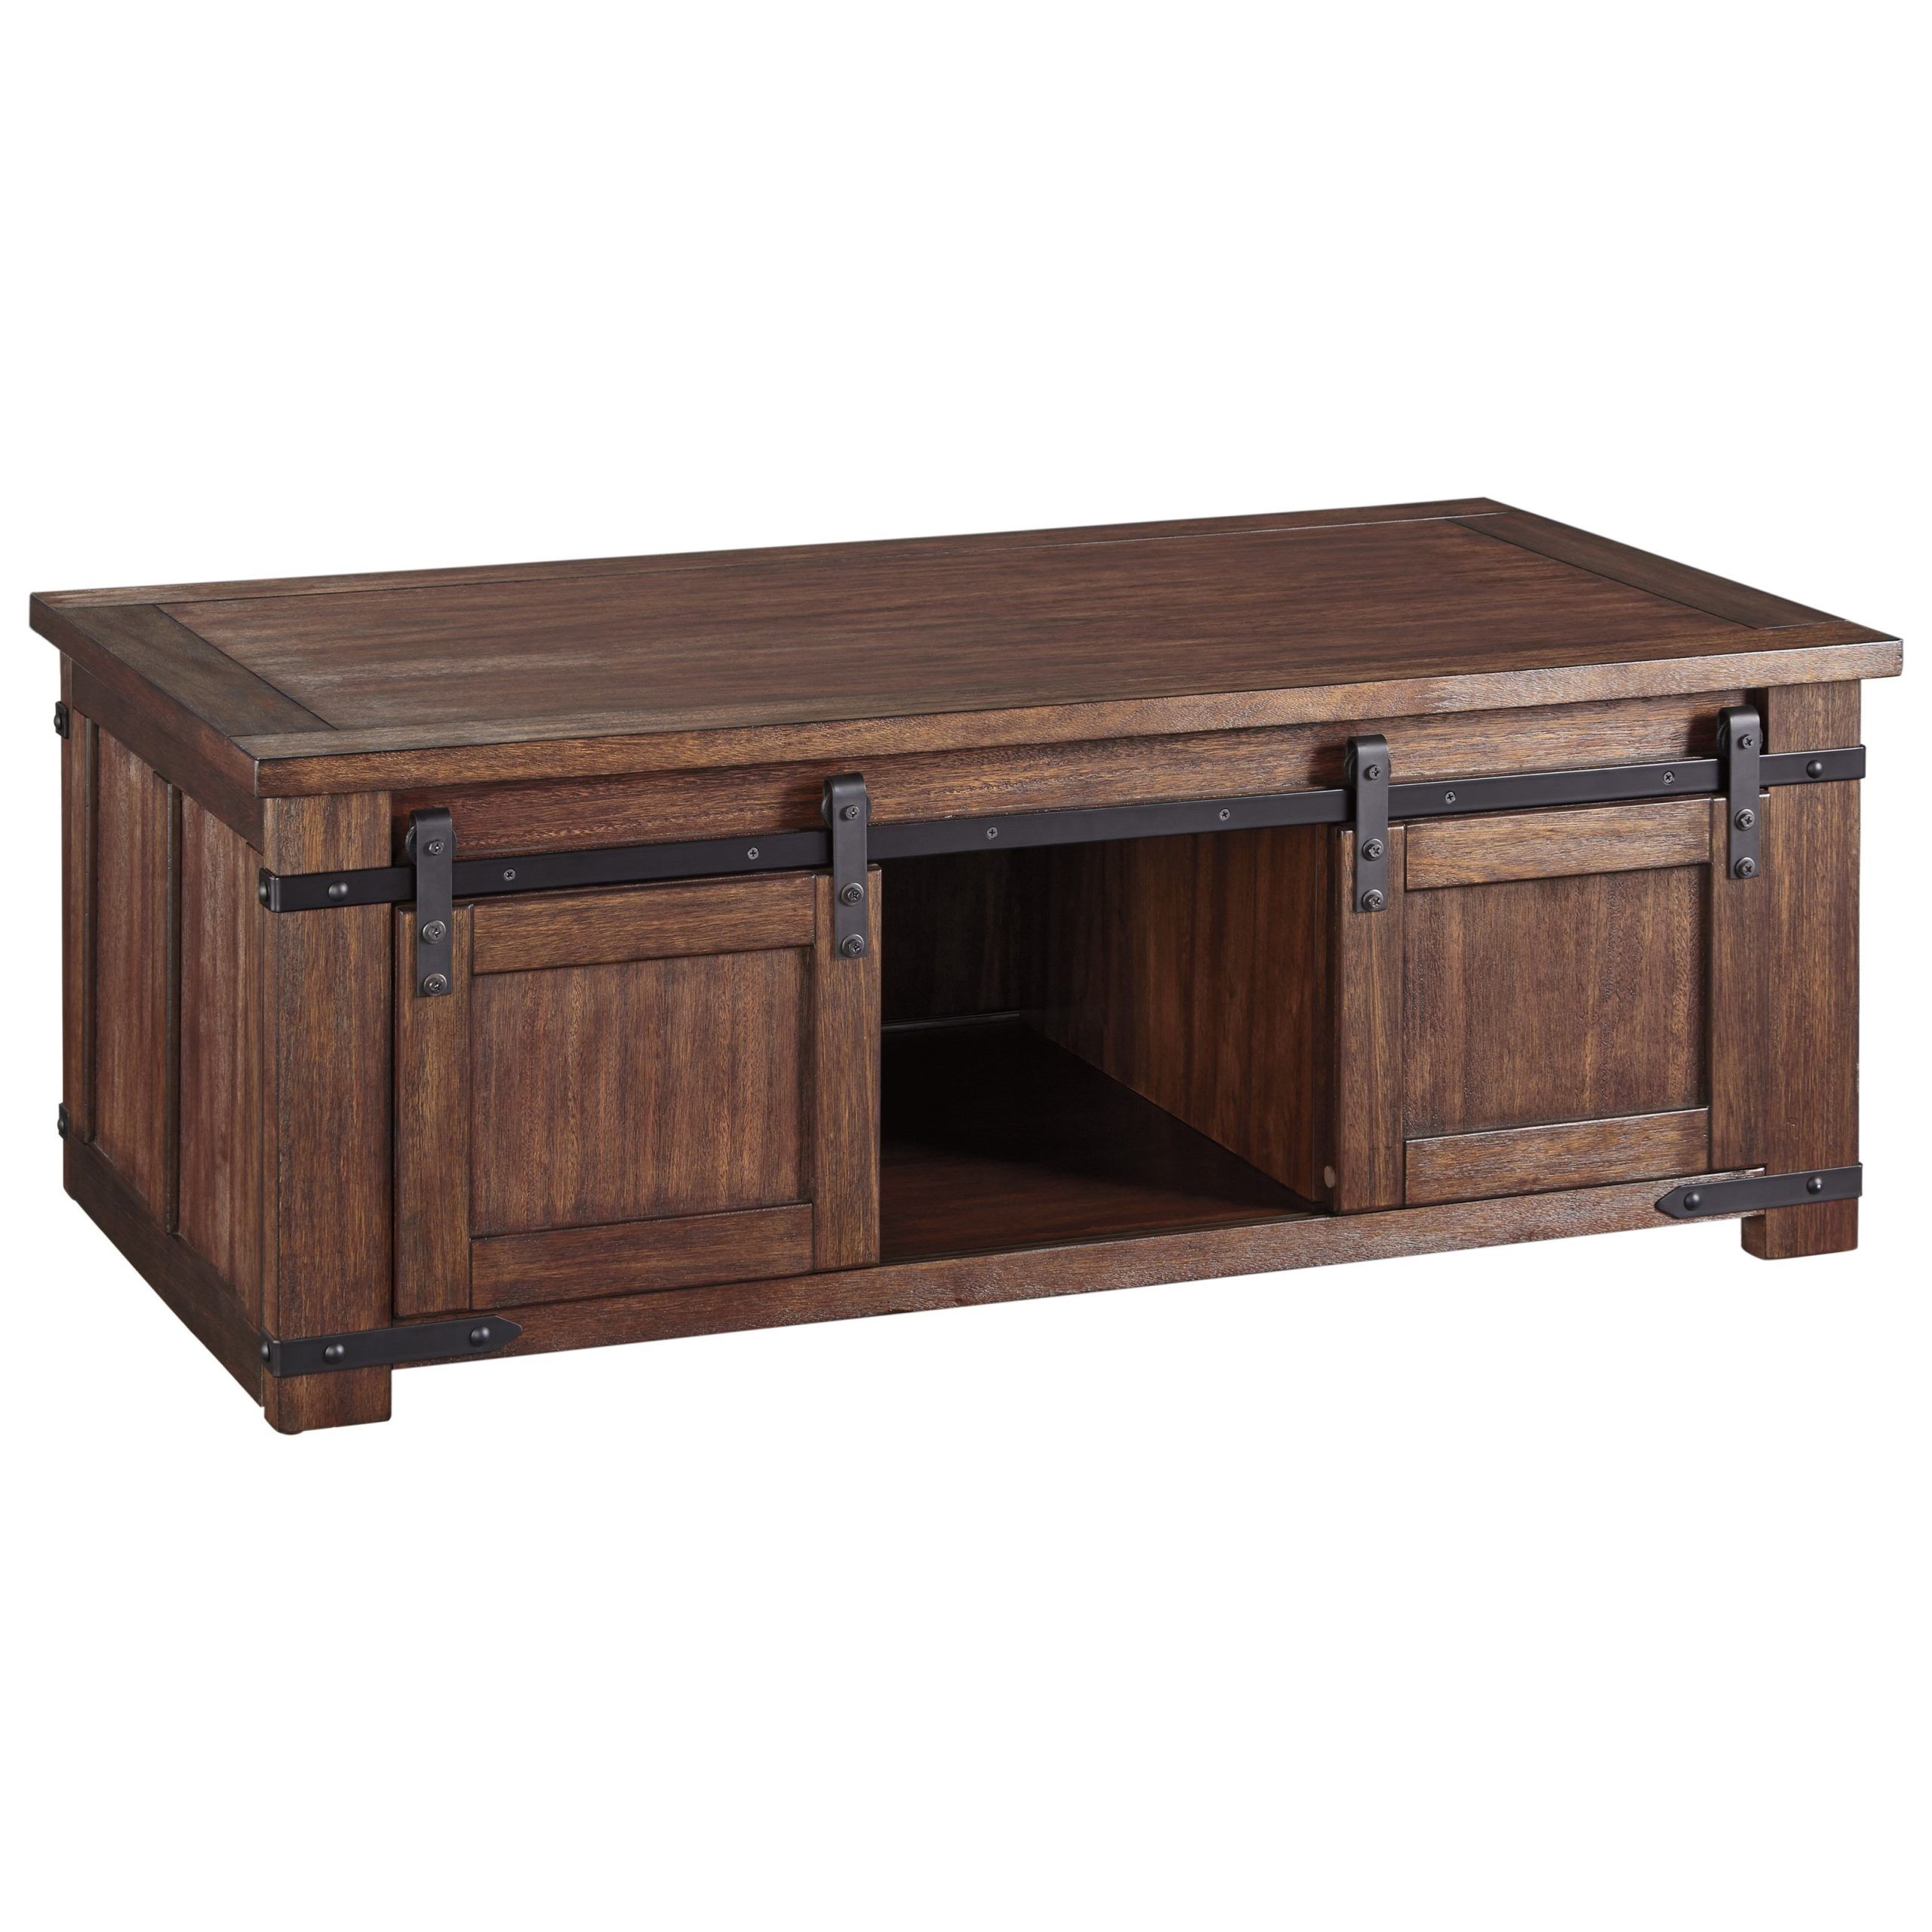 200327078 Rustic Cocktail Table With Sliding Barn Doors | Sadler's Home  Furnishings | Cocktail/coffee Tables With Regard To Coffee Tables With Sliding Barn Doors (View 10 of 15)